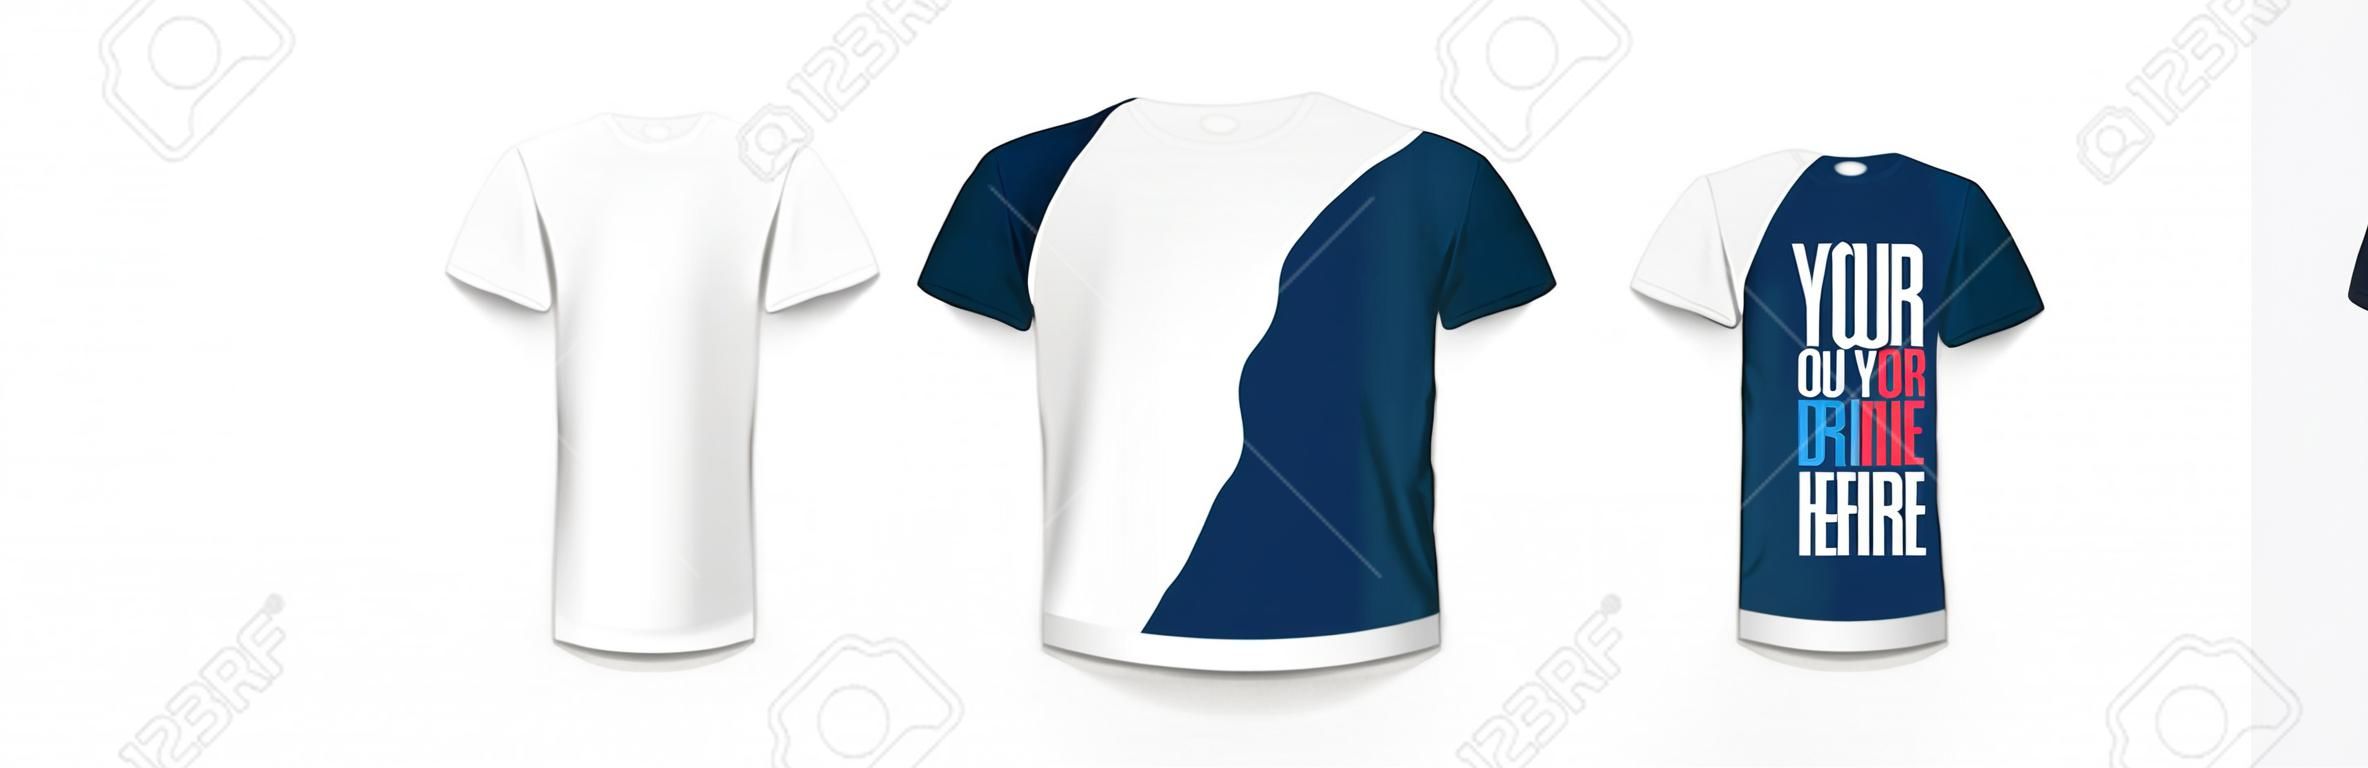 T-shirt mockup in black, white and blue colors. Mockup of realistic t shirt with short sleeves. Set of blank and basic t-shirts with empty space for design. Vector